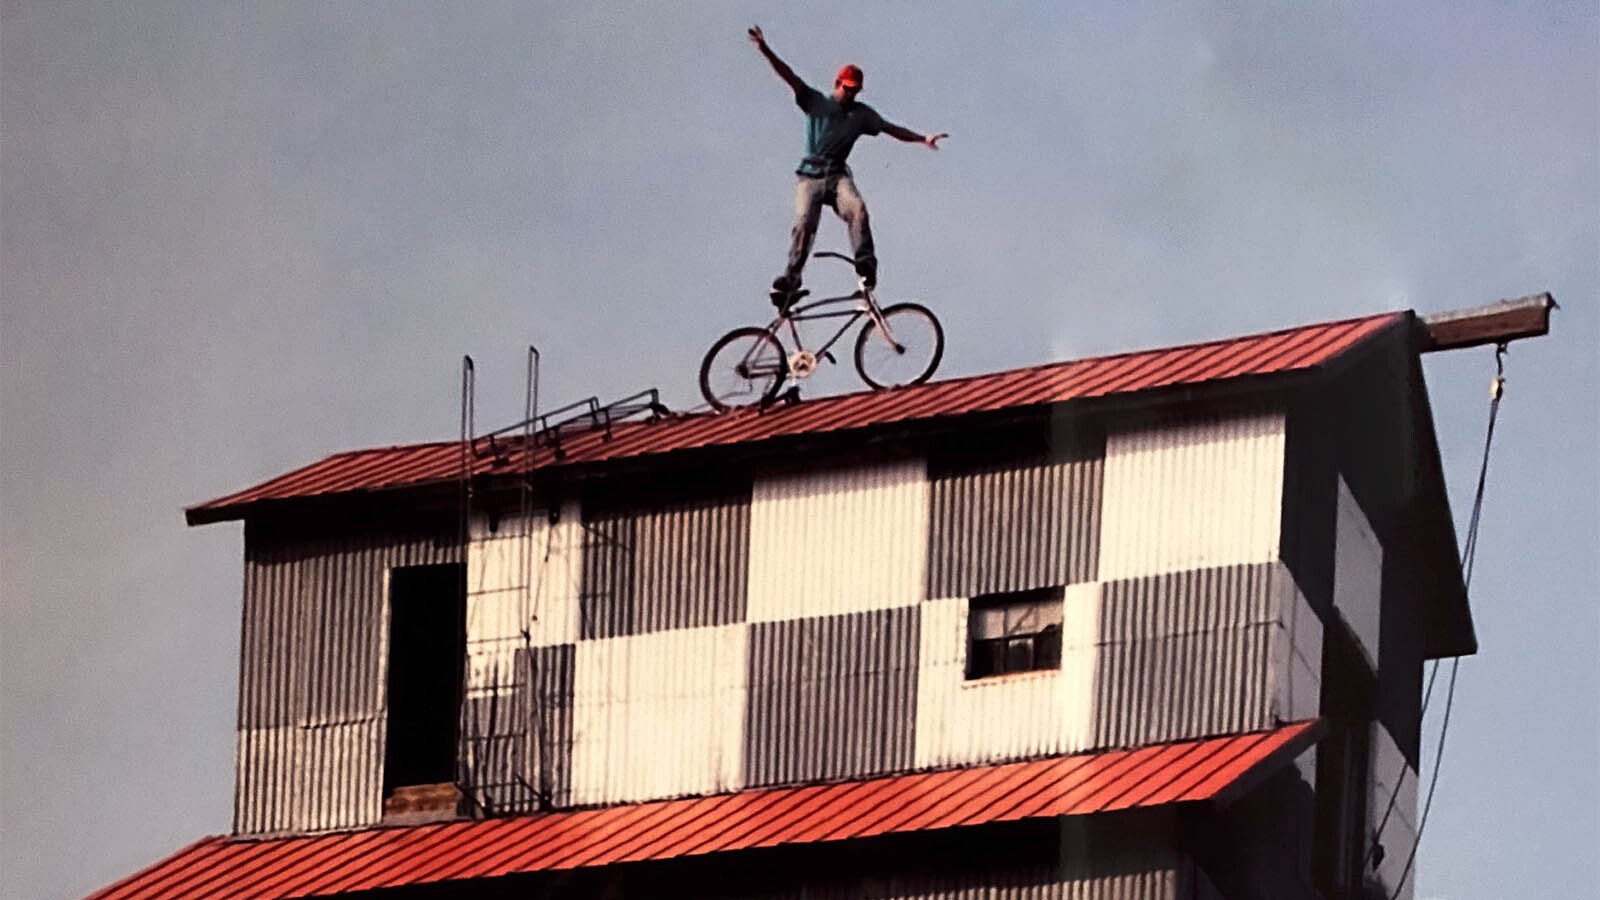 Trey Warren stands on top of a mountain bike he bolted to the roof of the 75-foot-tall Lander Elevator.